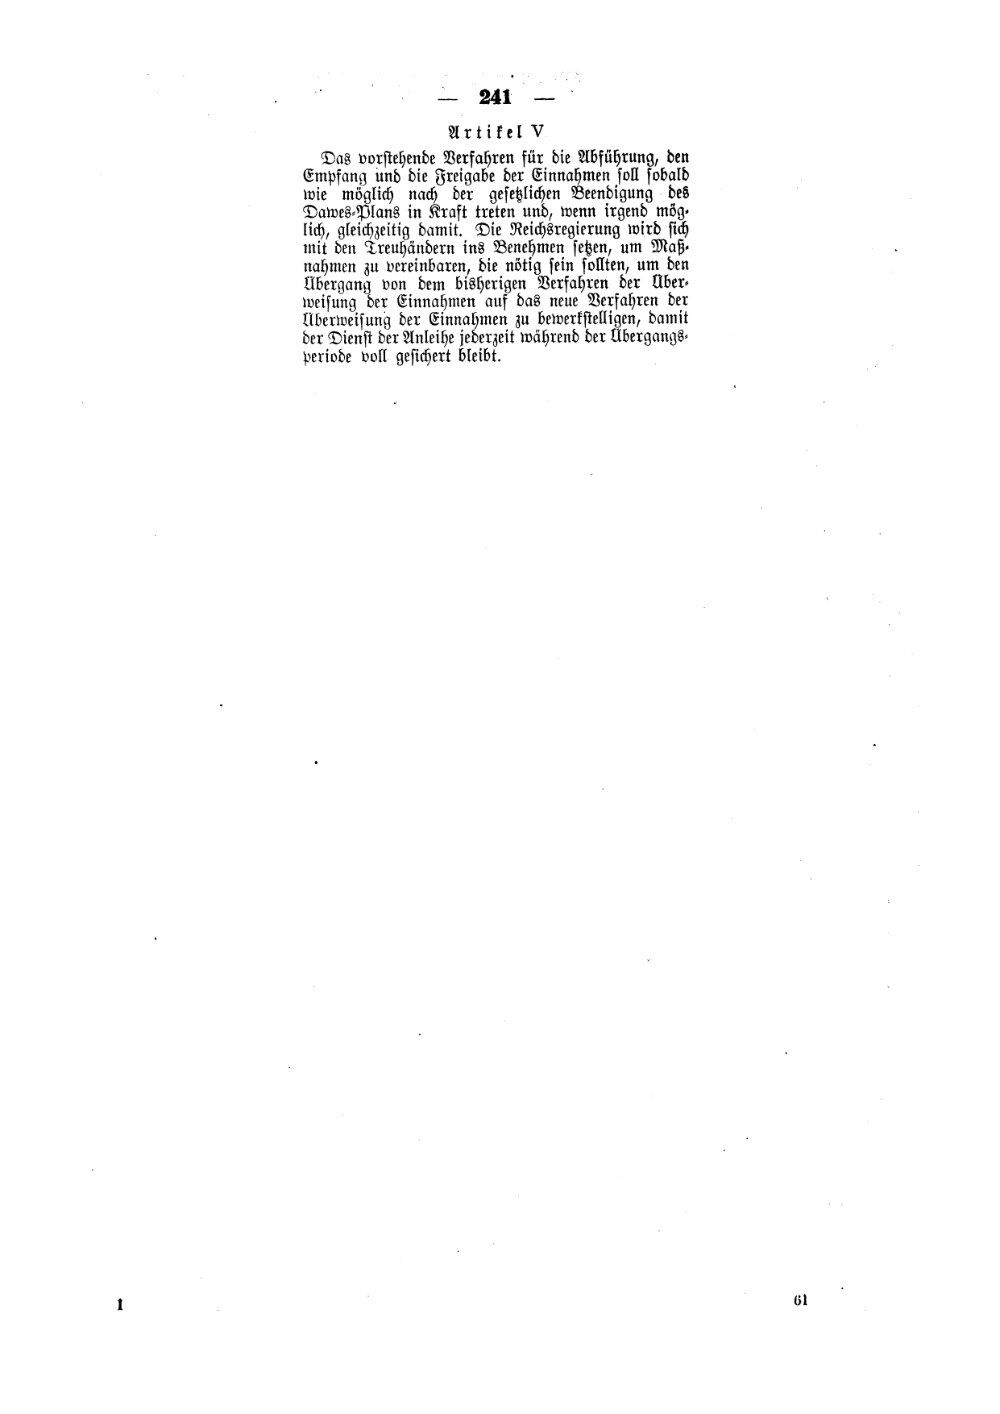 Scan of page 241